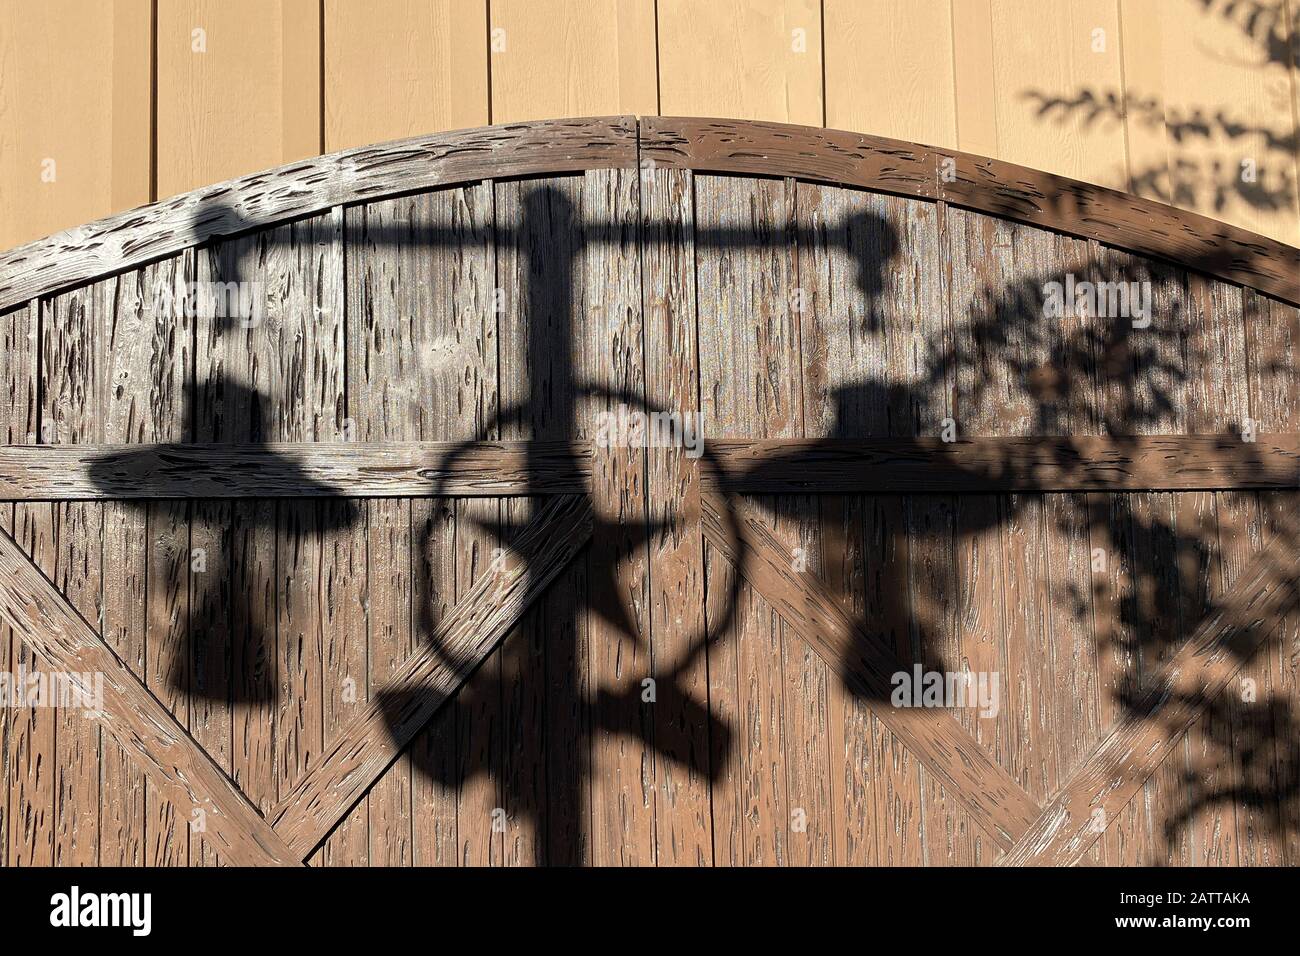 view of western ranch lanterns casting a shadow on barn doors Stock Photo